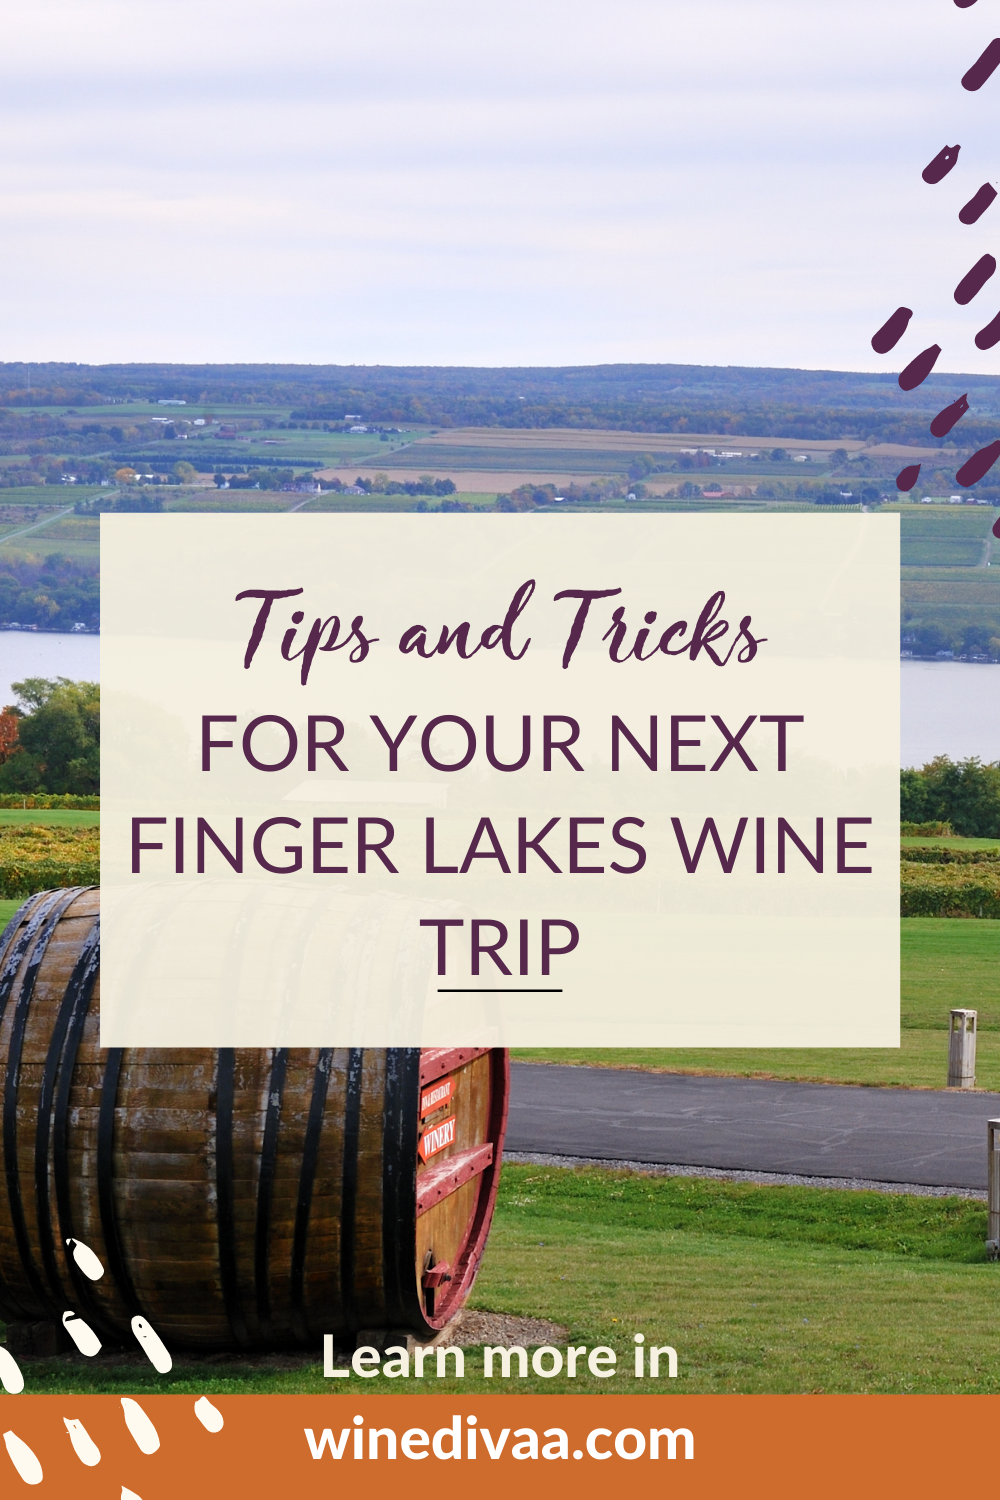 Tips and Tricks for your next Finger Lakes wine trip